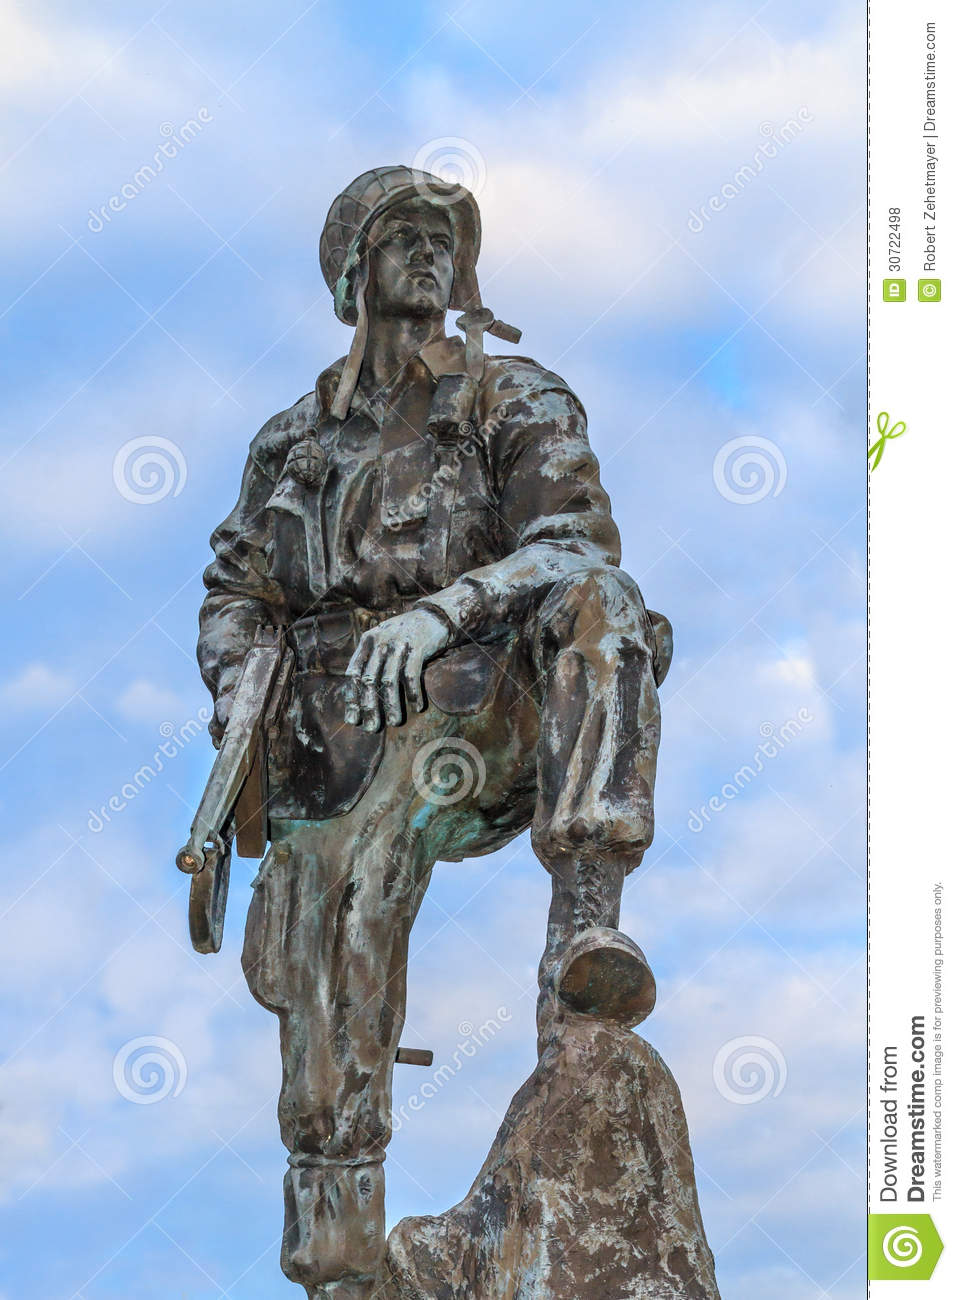 Iron Mike Statue In Normandy France Royalty Free Stock Photos   Image